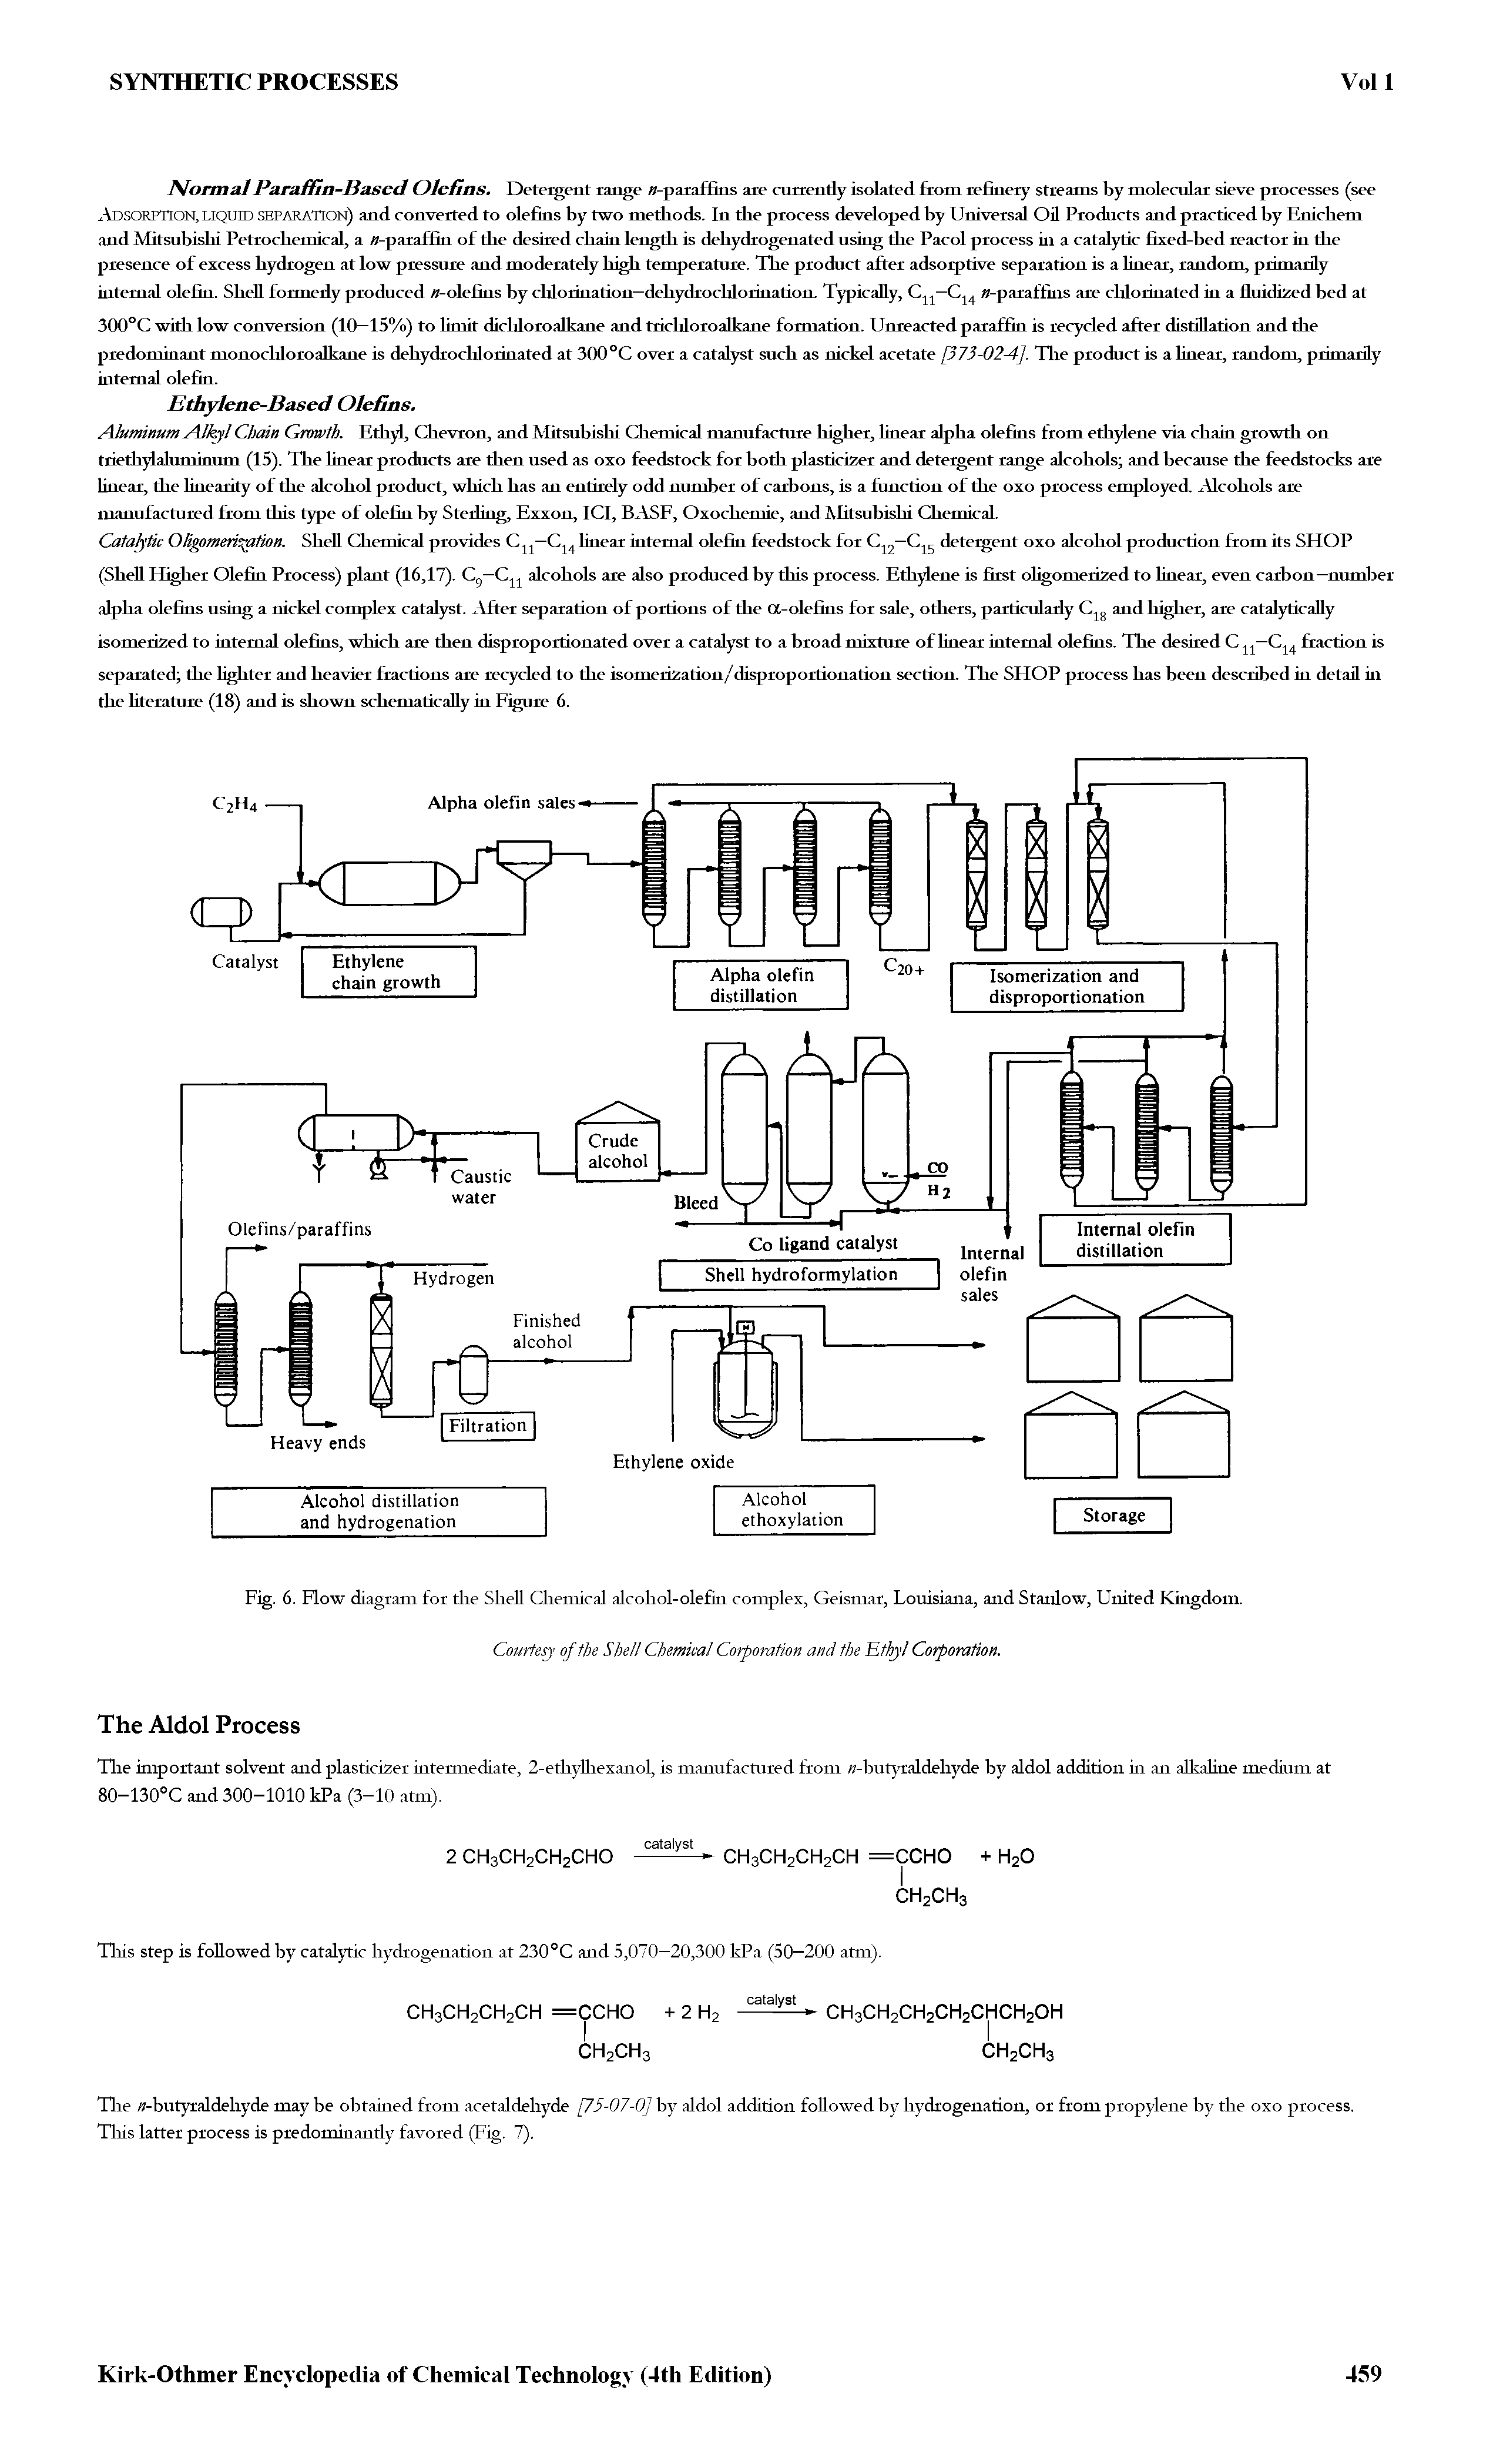 Fig. 6. Flow diagram for the Shell Chemical alcohol-olefin complex, Geismar, Louisiana, and Stanlow, United Kingdom.